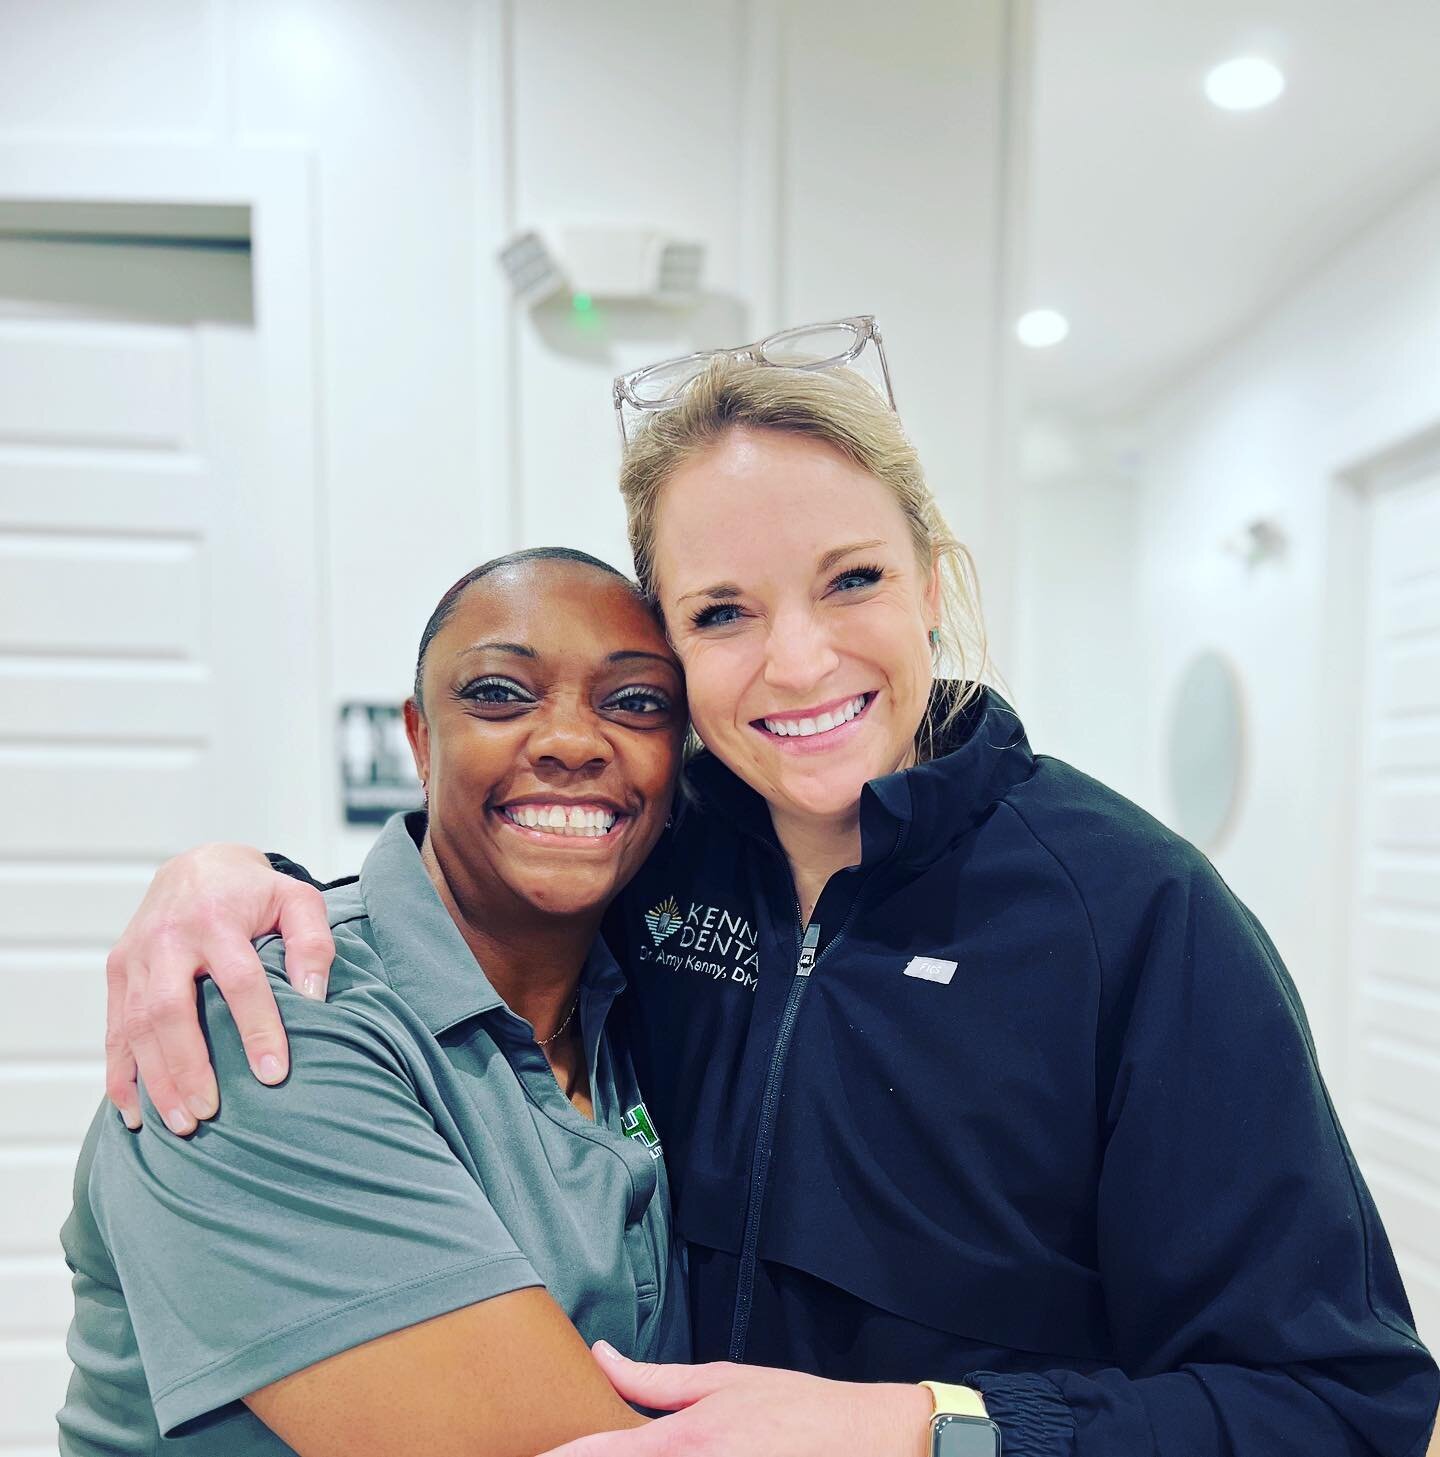 ☀️Sunnier Smiles☀️ 
&lsquo;I&rsquo;ve been wanting to do this for over 10 years, I can&rsquo;t stop looking at myself!&rsquo;

Small slight changes to a smile can make all the difference. When a patient is this happy, how could you not smile!